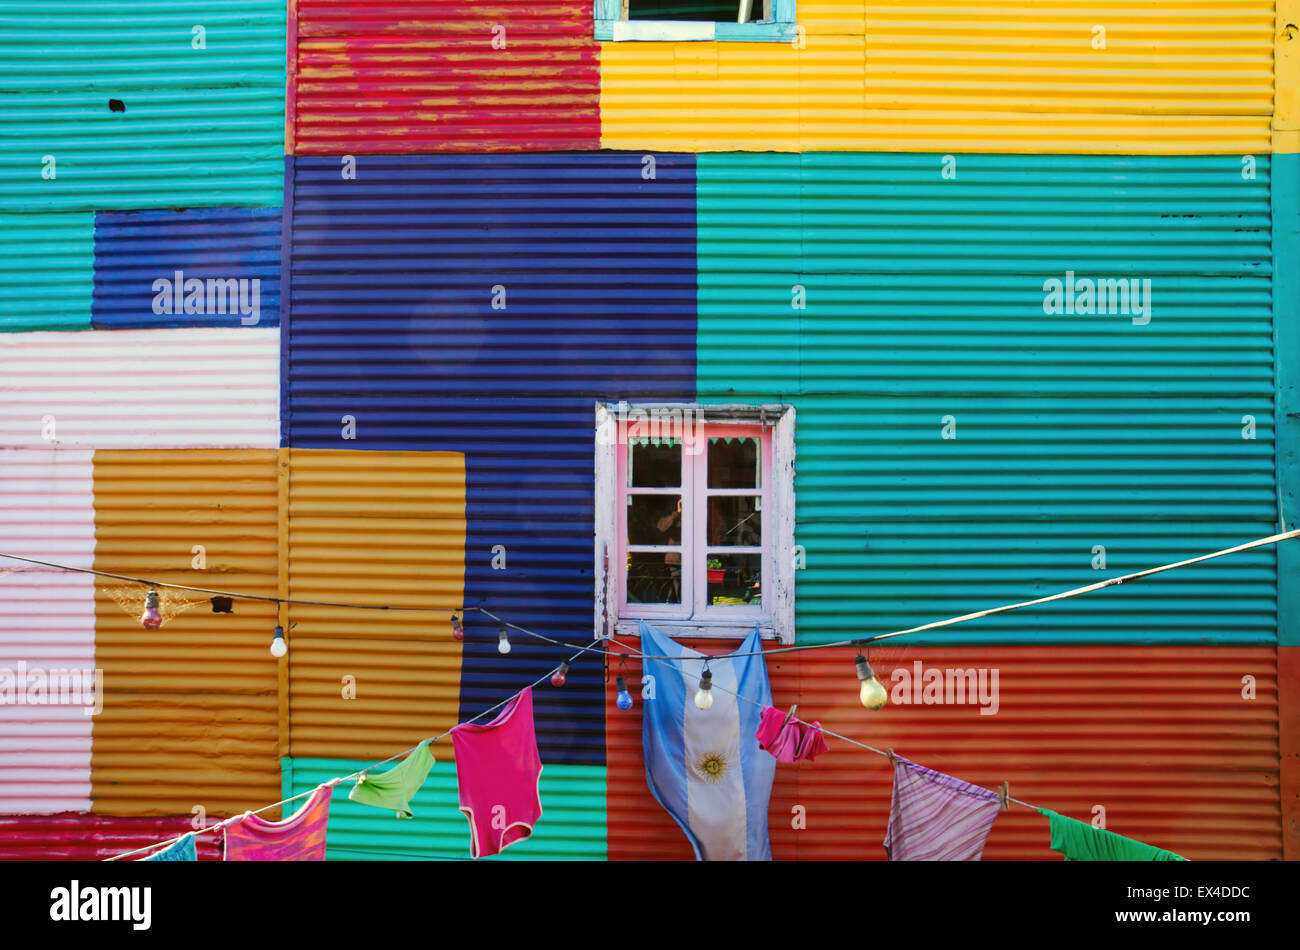 One of the typical walls in La Boca, Buenos Aires Stock Photo